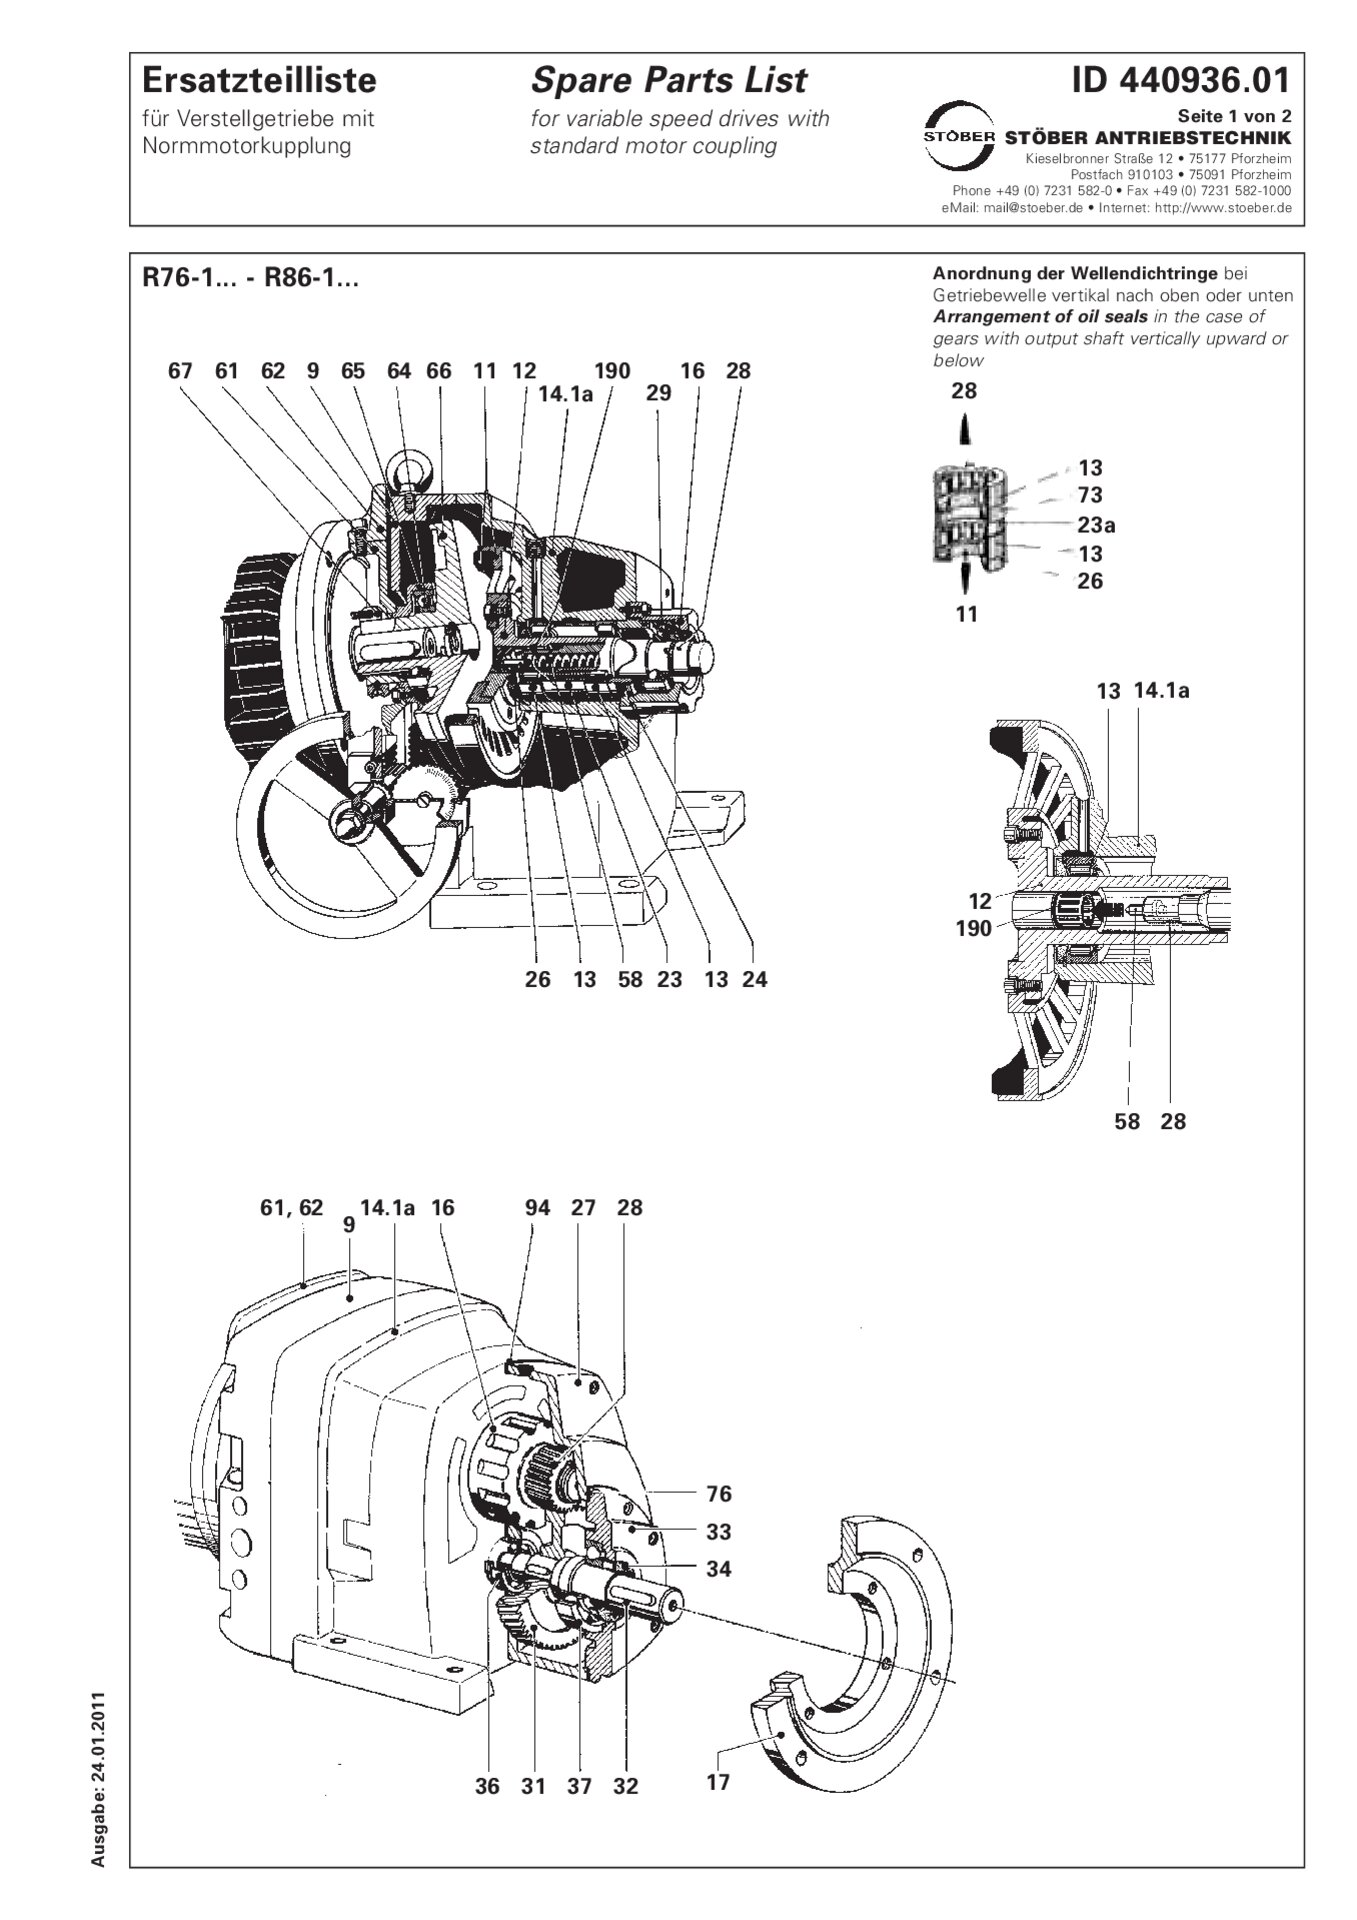 Spare parts list R76-1/R86-1 with standard motor coupling